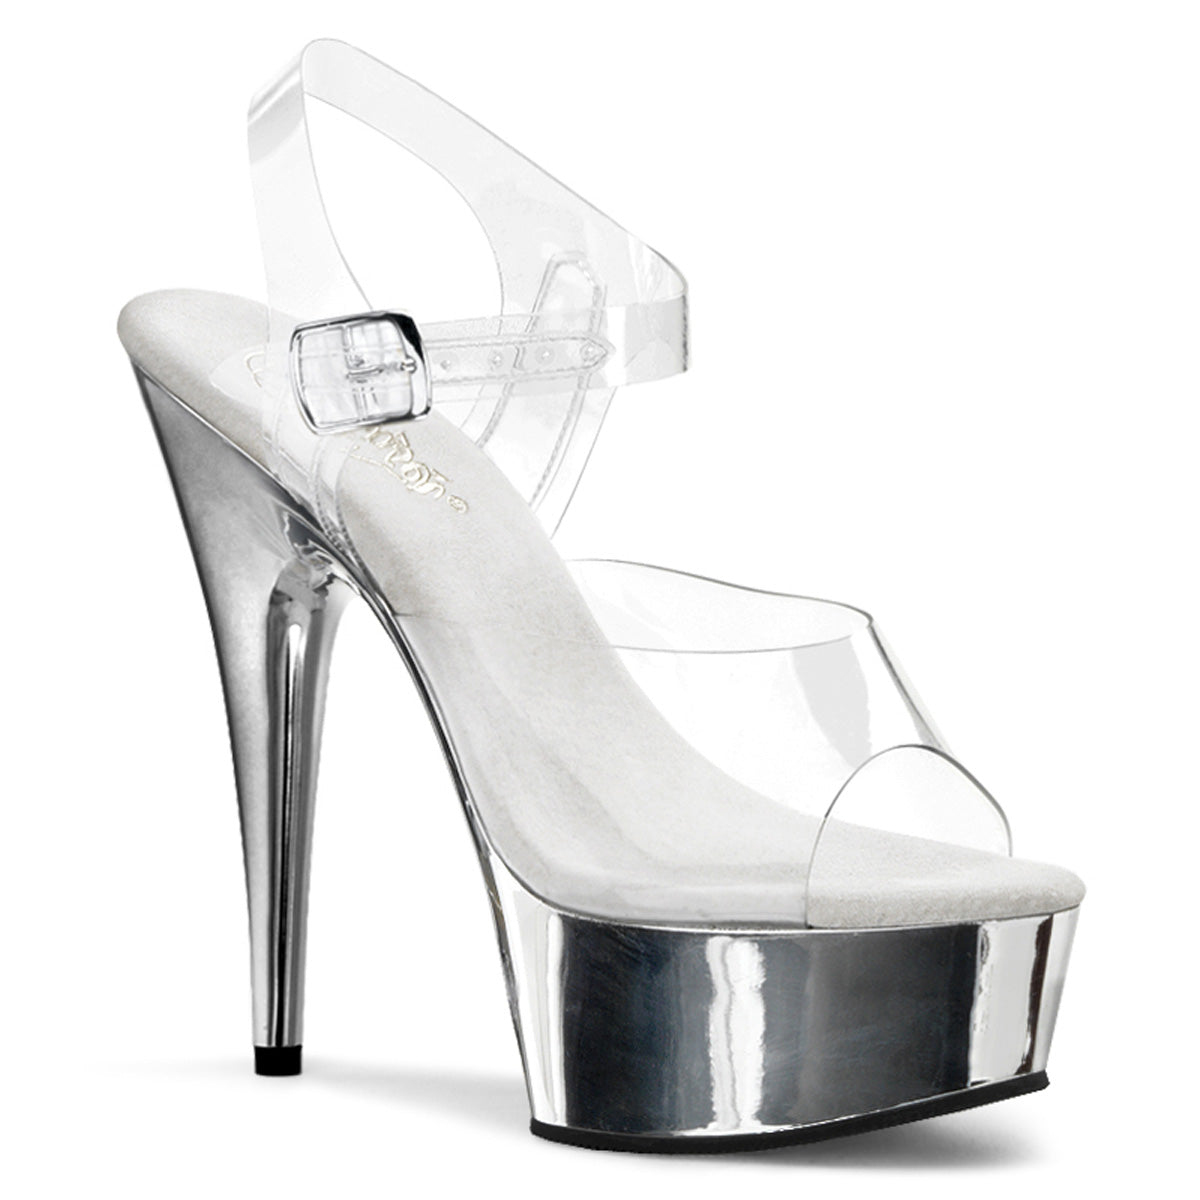 DELIGHT-608 6" Heel Clear Silver Chrome Pole Dance Platforms-Pleaser- Sexy Shoes